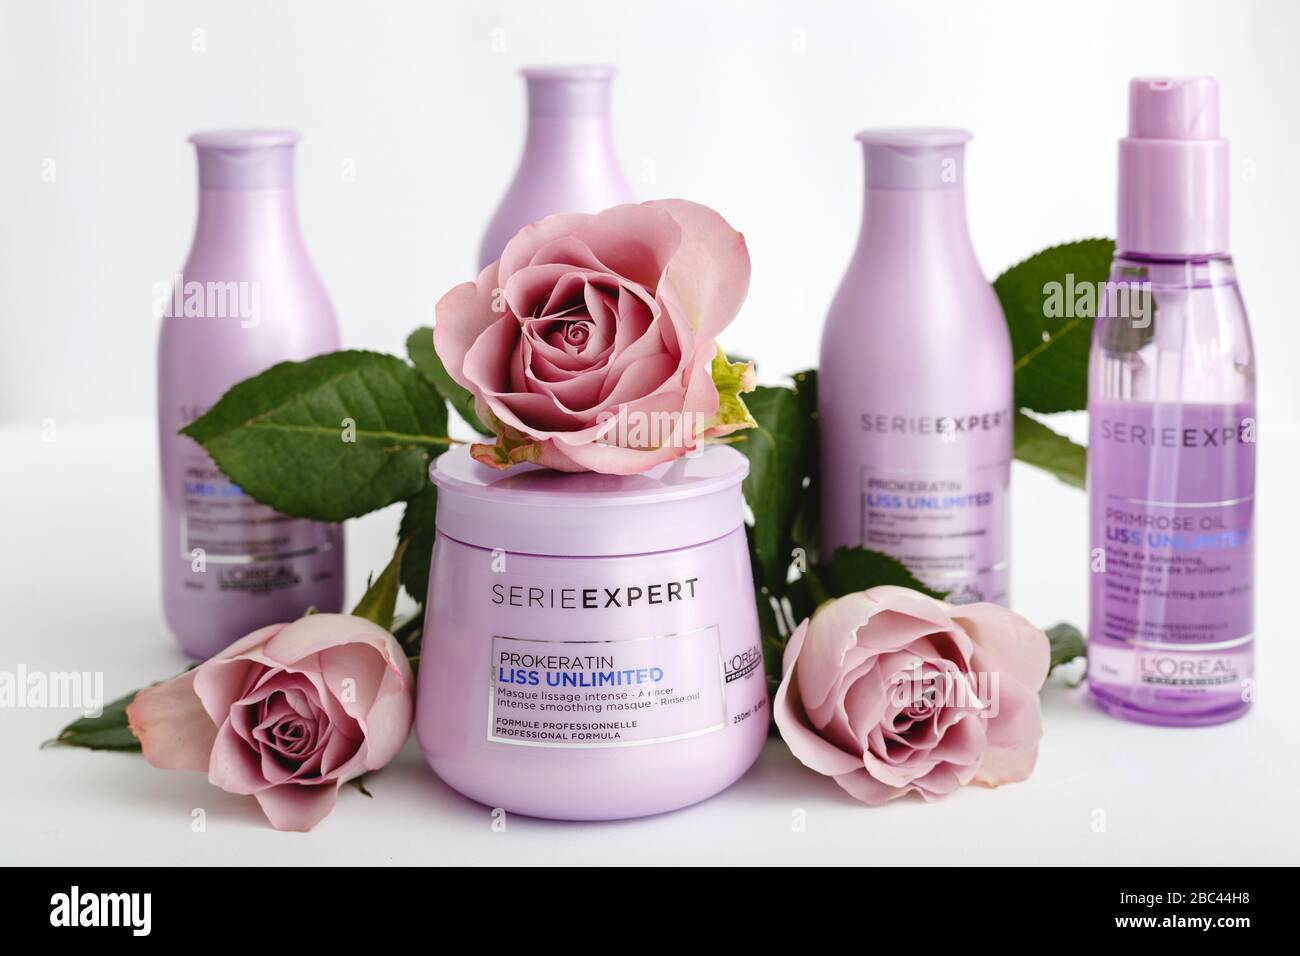 Hair cosmetics, hair shampoo, beauty products for beauty salon with flower  on white background. L'oreal Professionnel serie expert. Women hair care  Stock Photo - Alamy